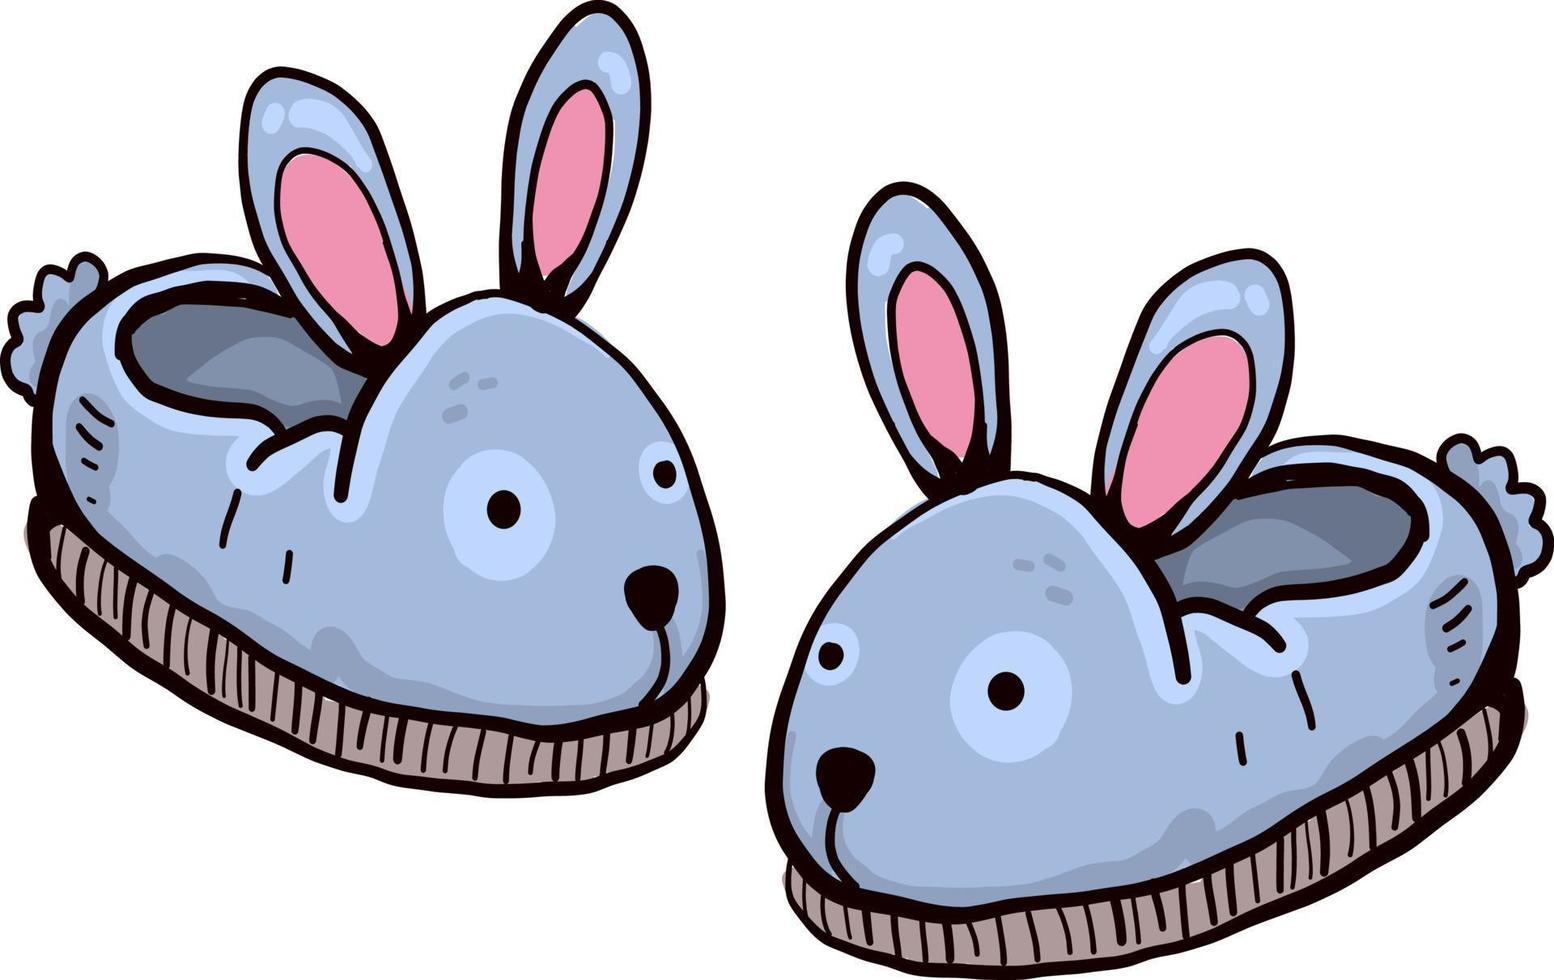 Cute bunny slippers, illustration, vector on white background